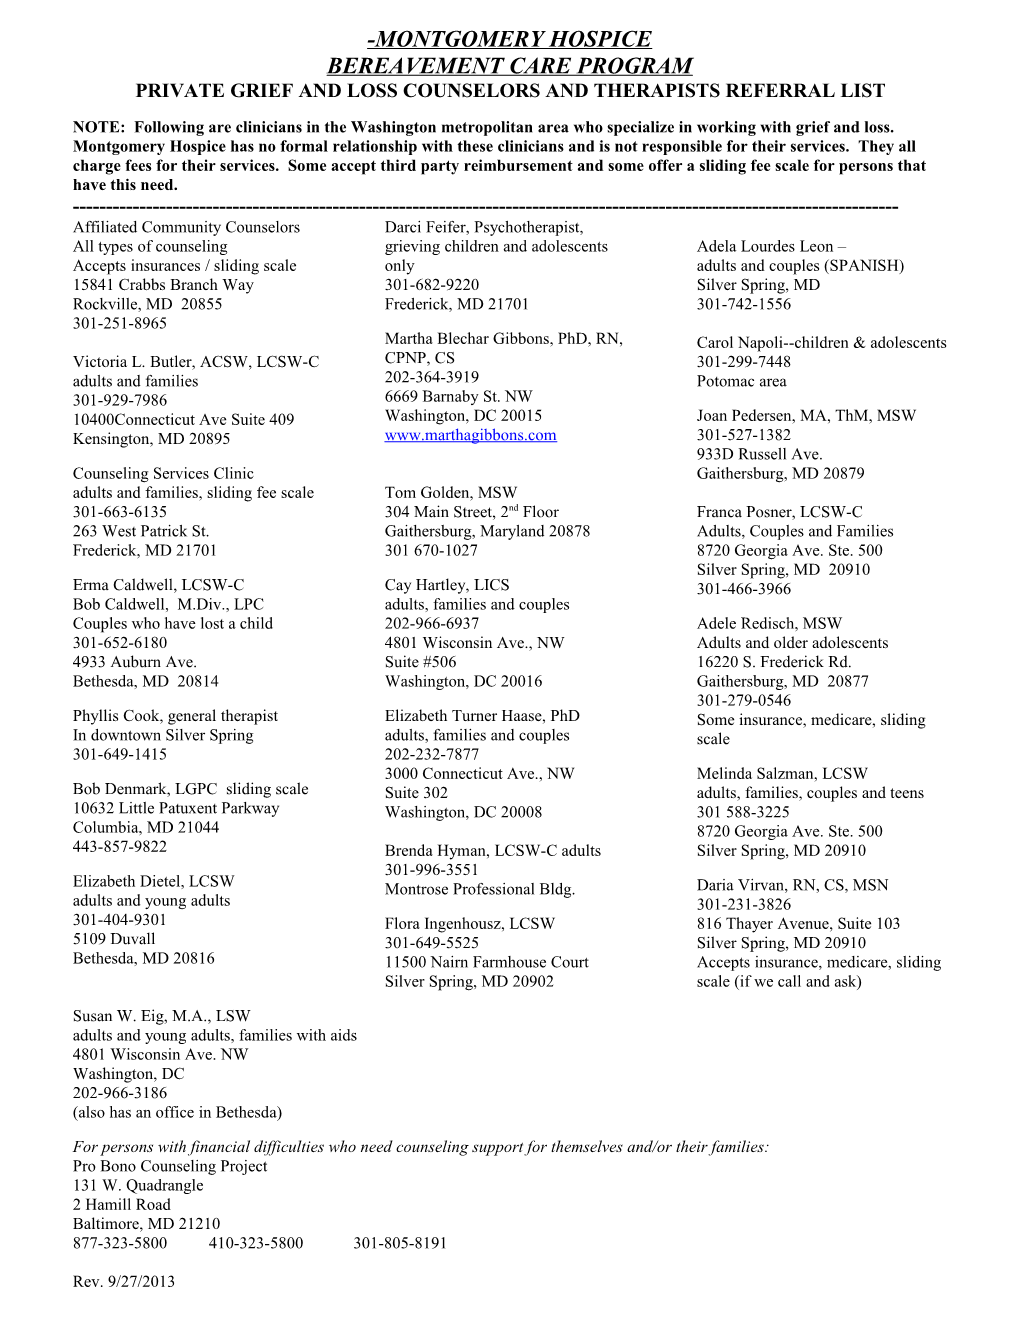 Grief and Loss Counselors and Therapists Referral List